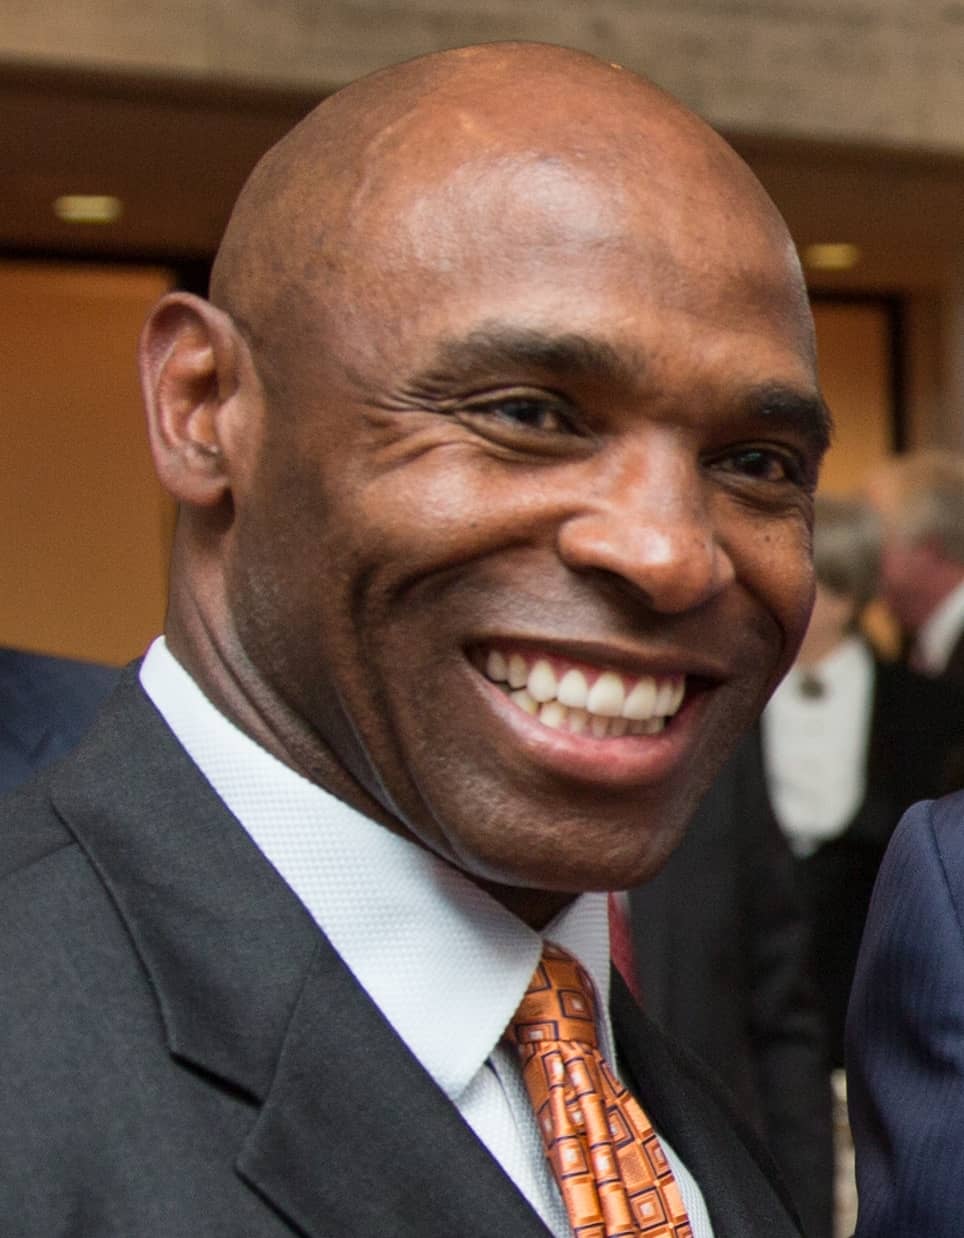 Charlie_Strong_at_LBJ_Library_in_2014.jpg